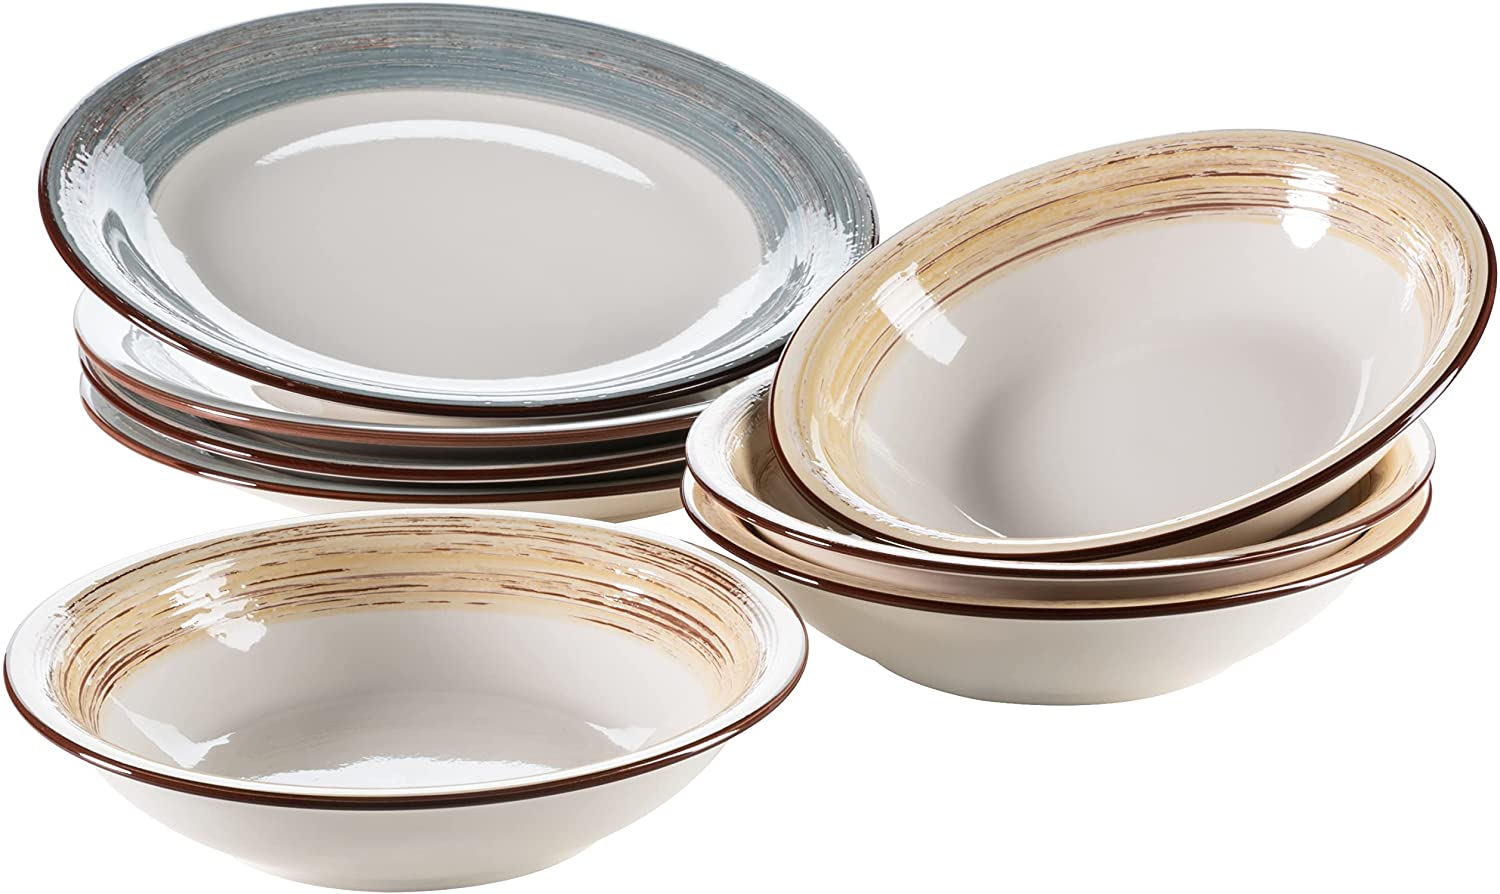 Maser Mäser 931375 Duole Series Plate Set for 4 People, 8-Piece Vintage Dinner Service with Dinner Plate and Soup Plate in Shabby Chic Design, Ceramic, Blue / Beige